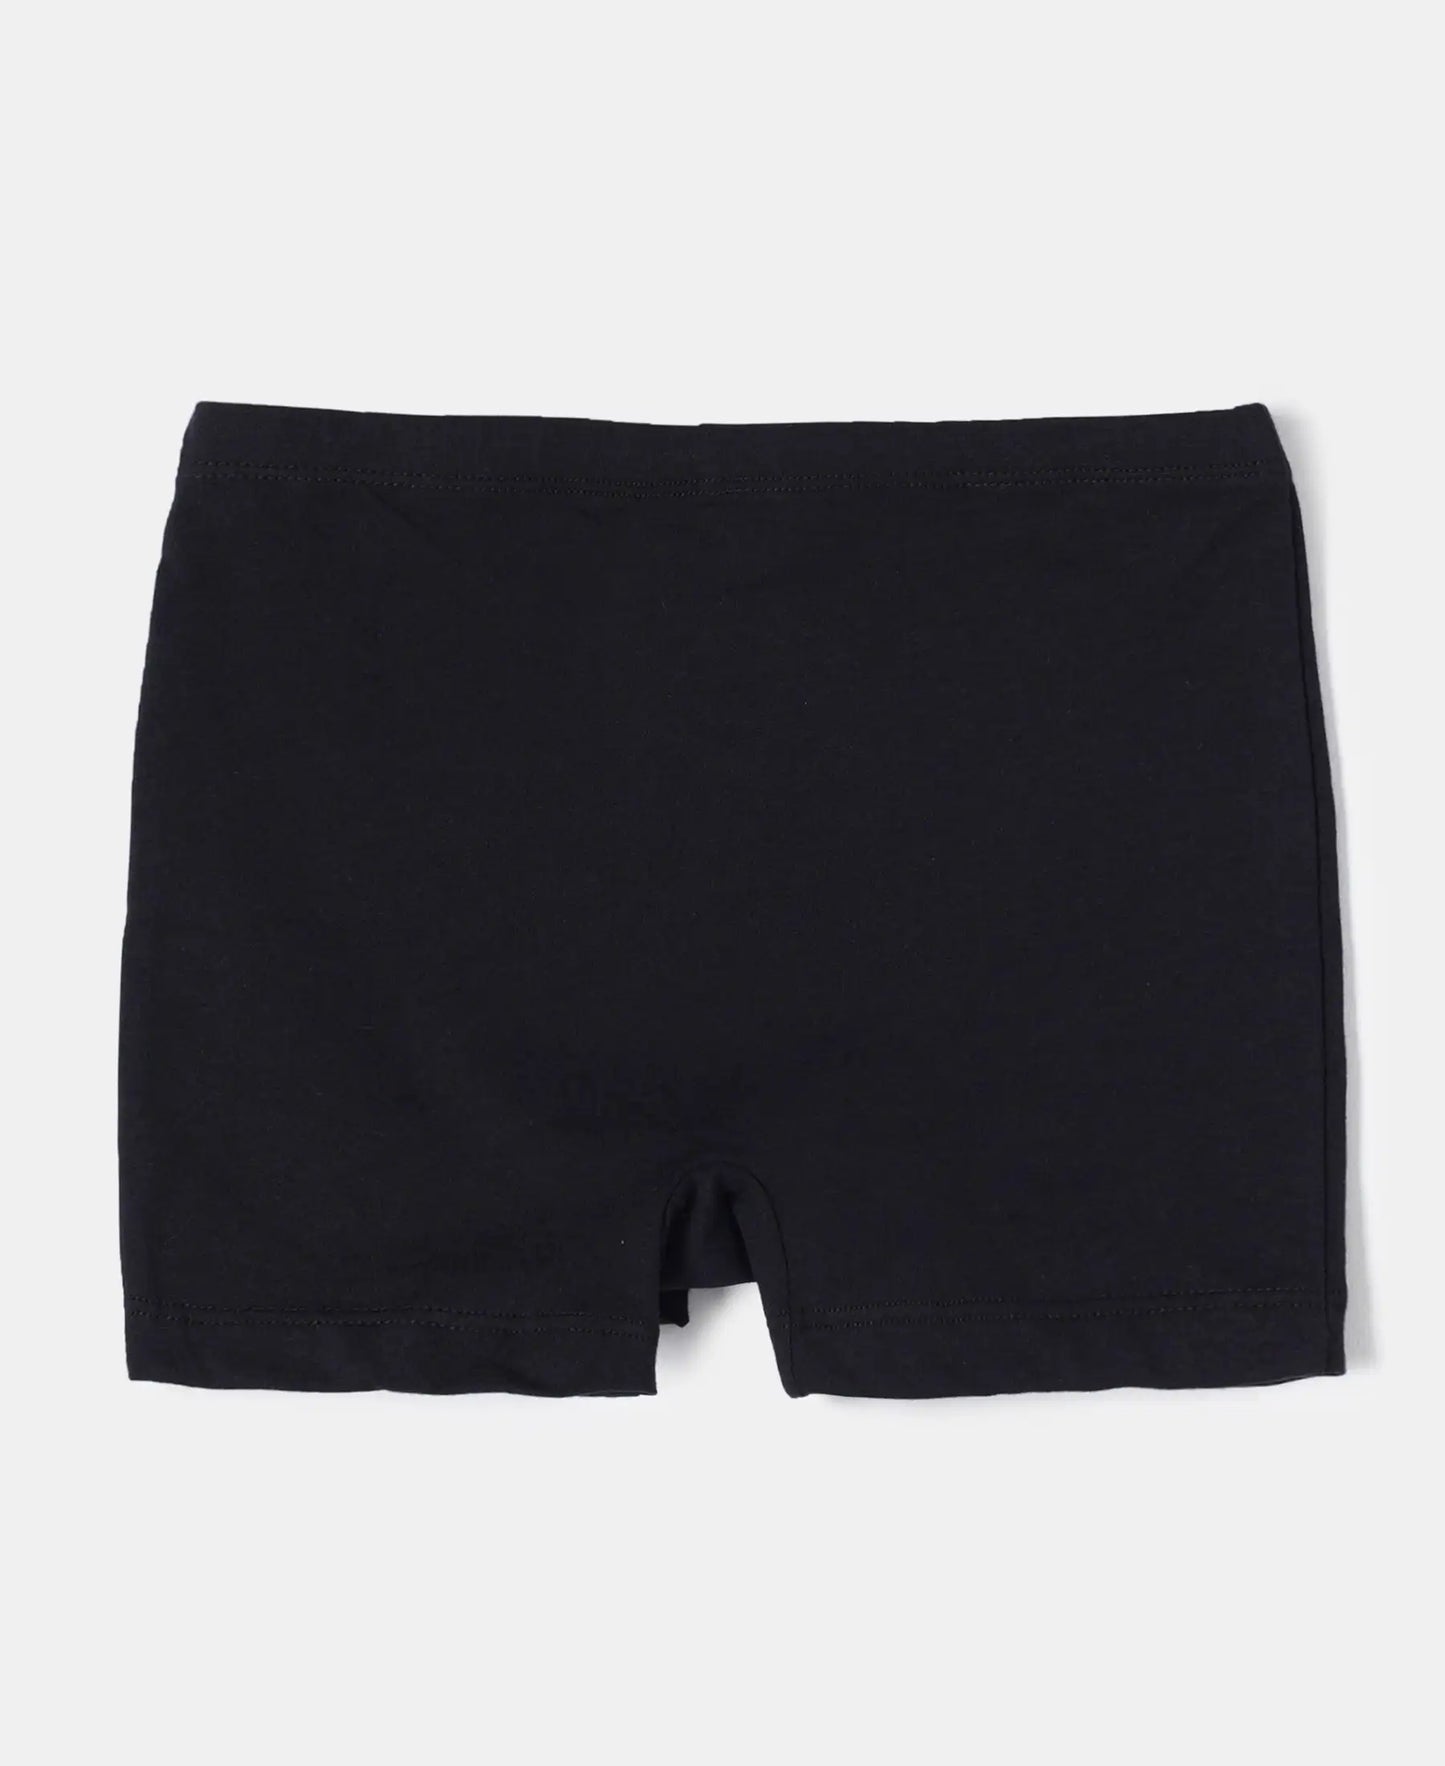 Super Combed Cotton Elastane Stretch Shorties with Ultrasoft Waistband - Black-3